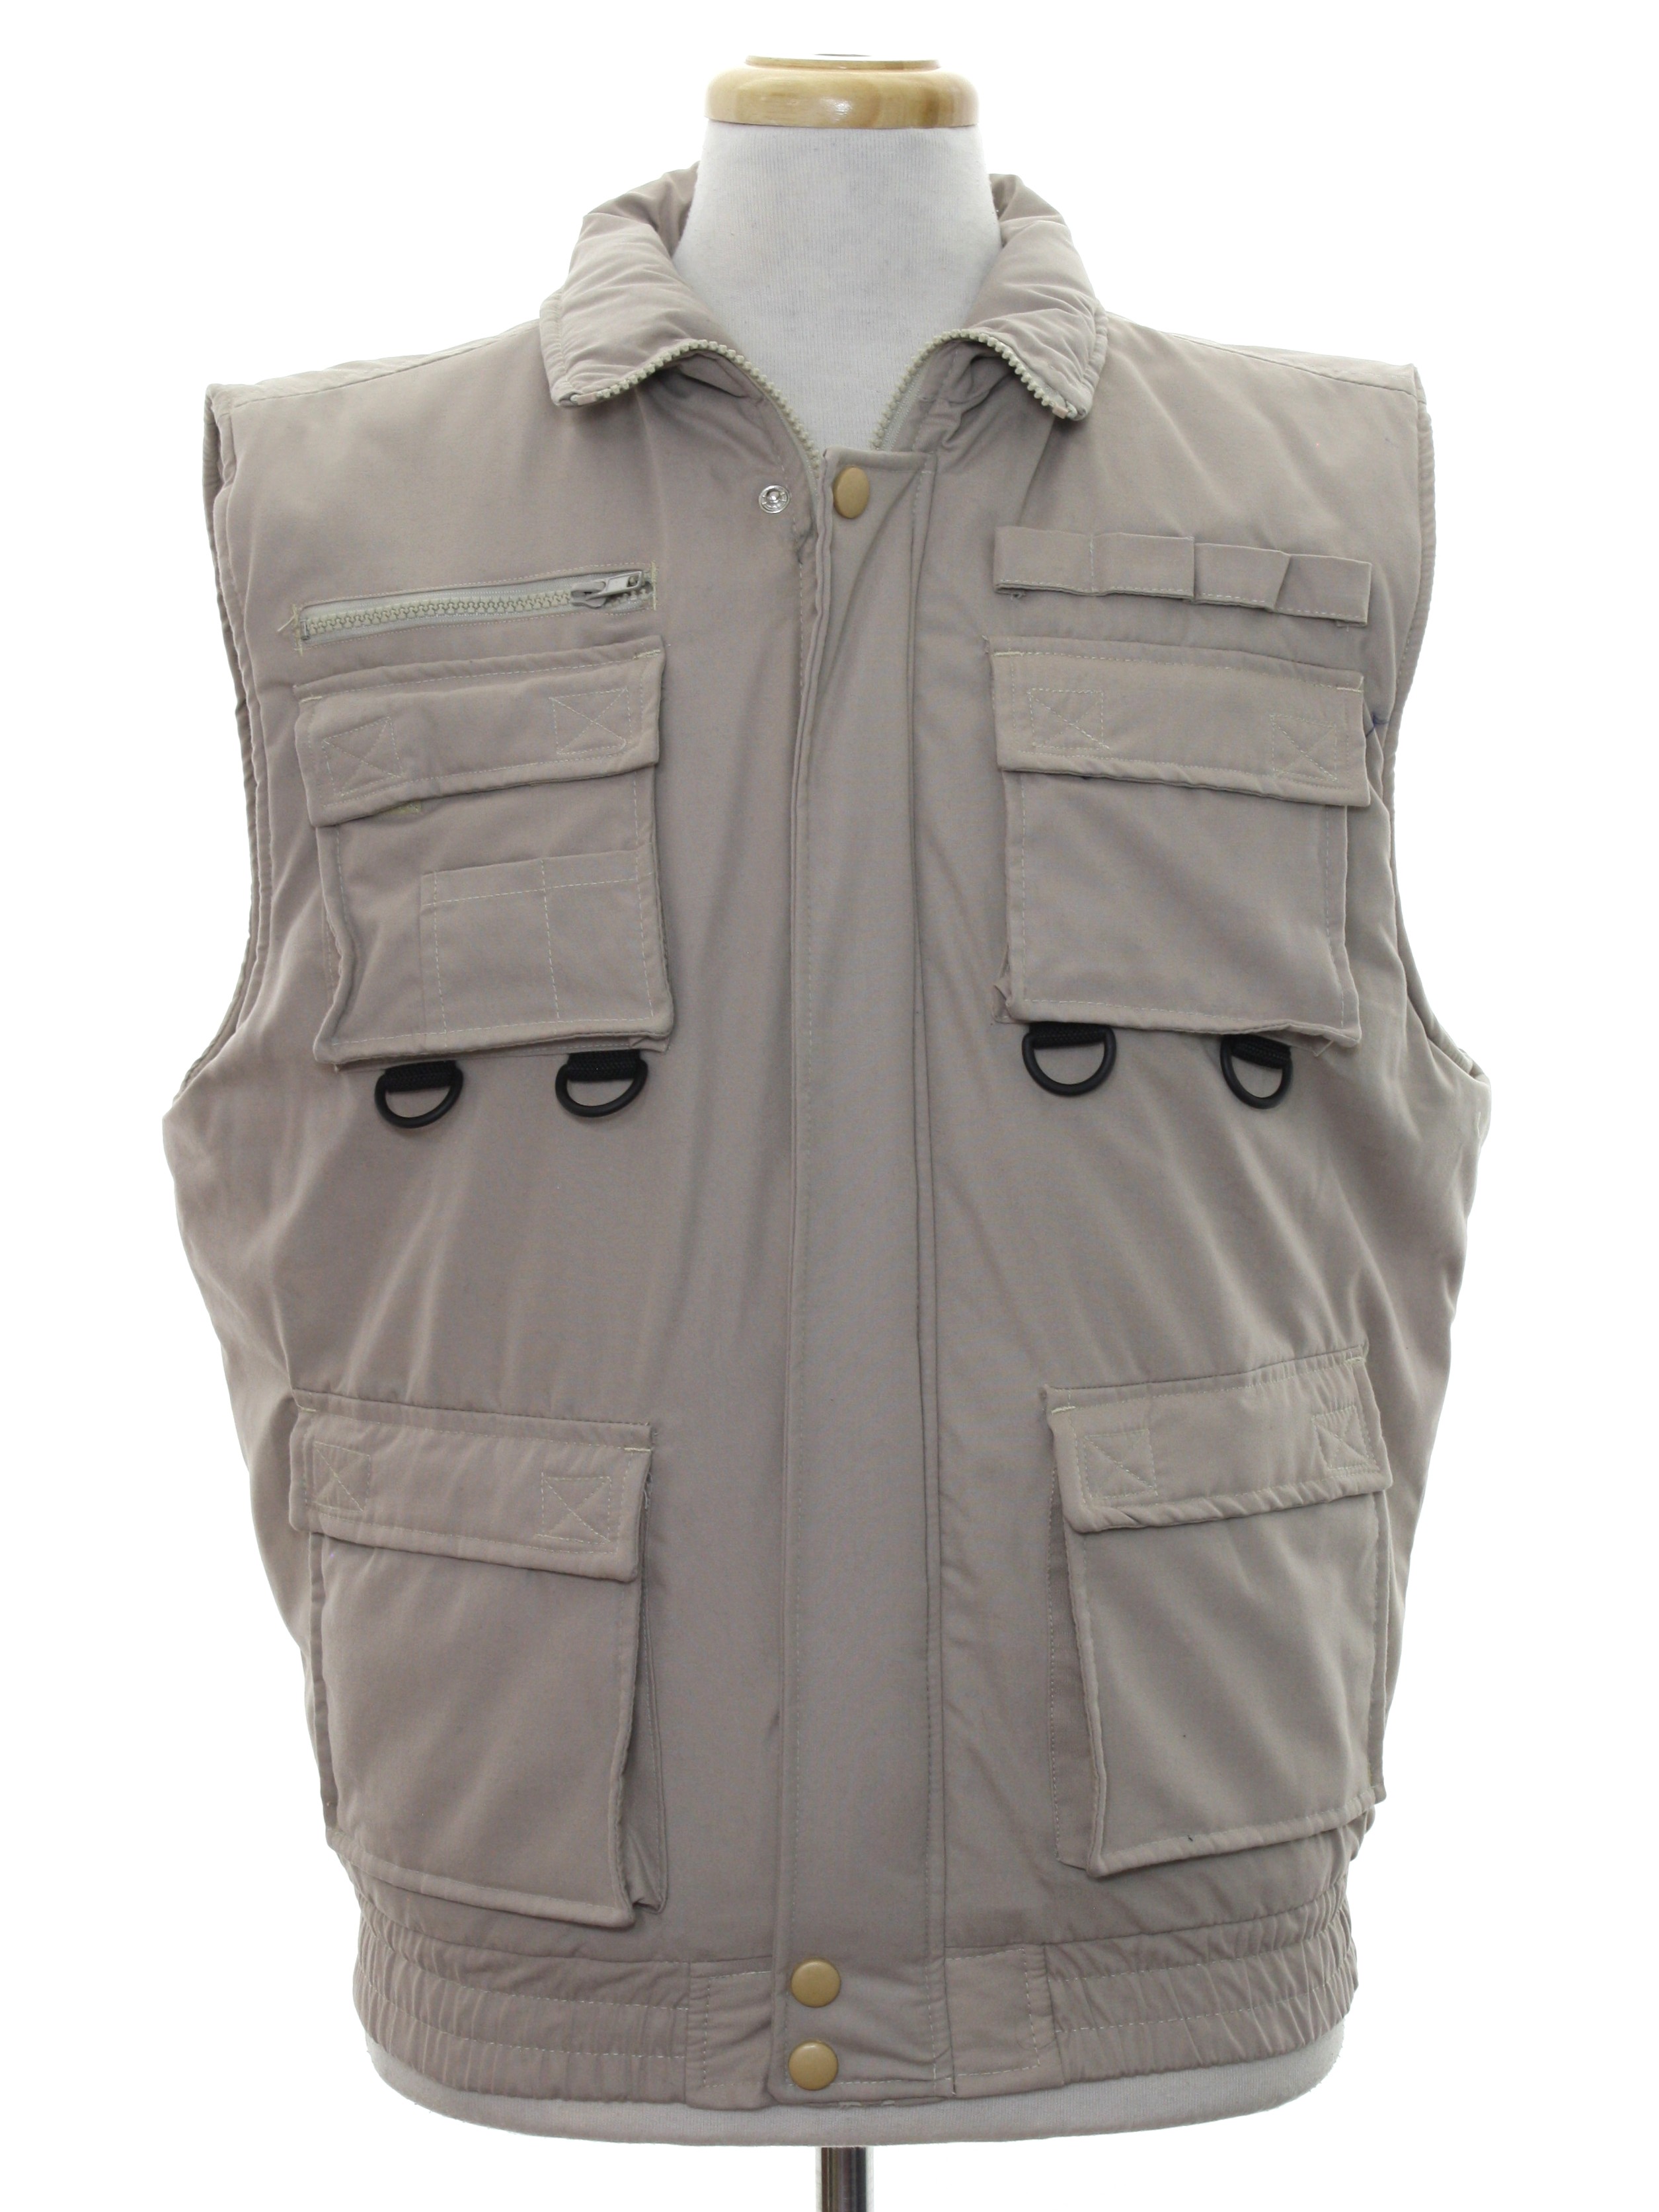 Stag Hill by Haband 1990s Vest